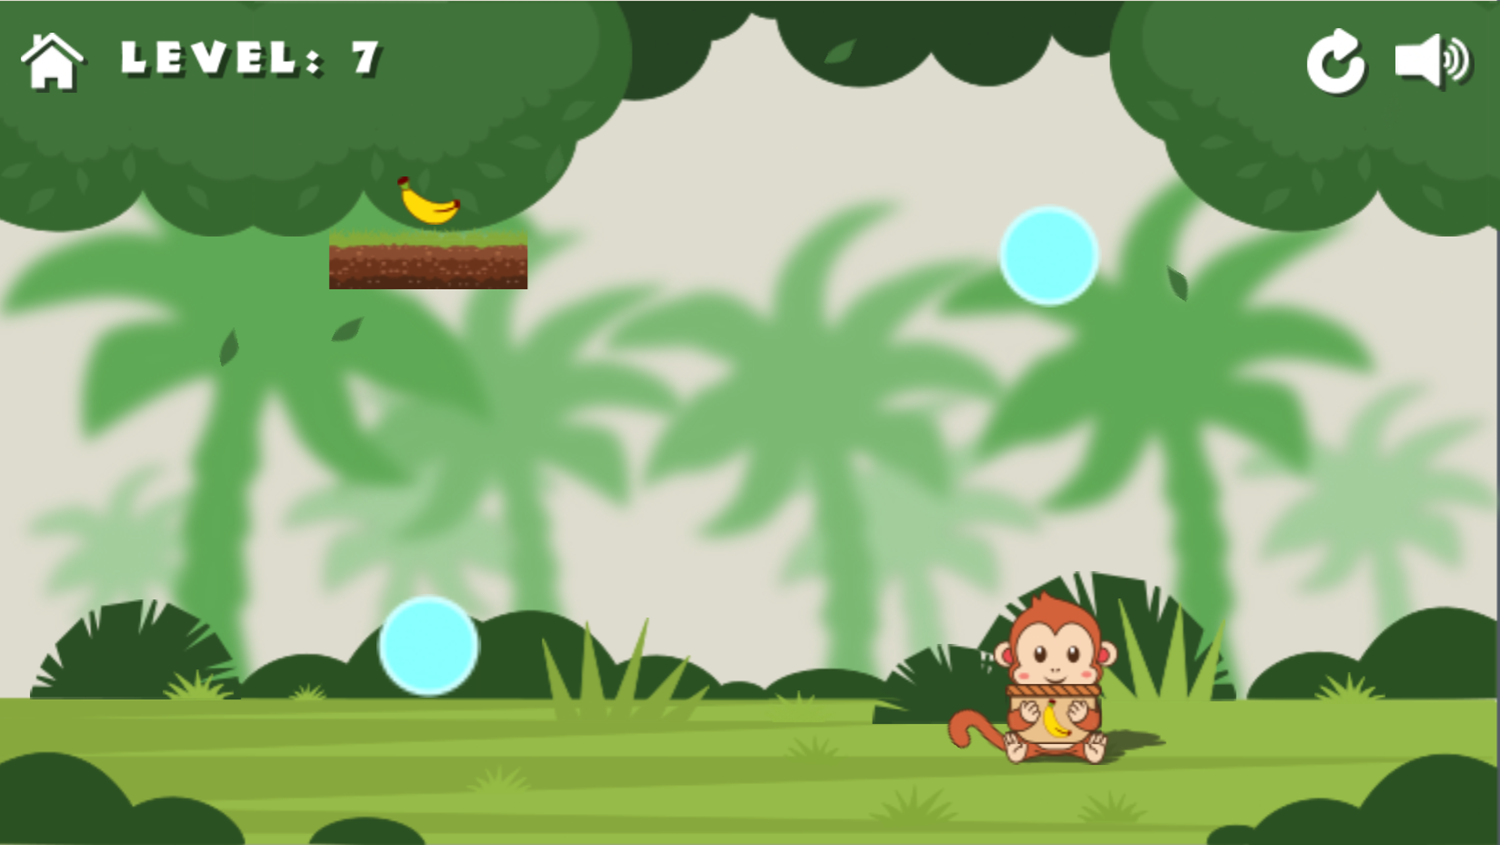 Monkeys and Fruits Game Level With Warps Screenshot.